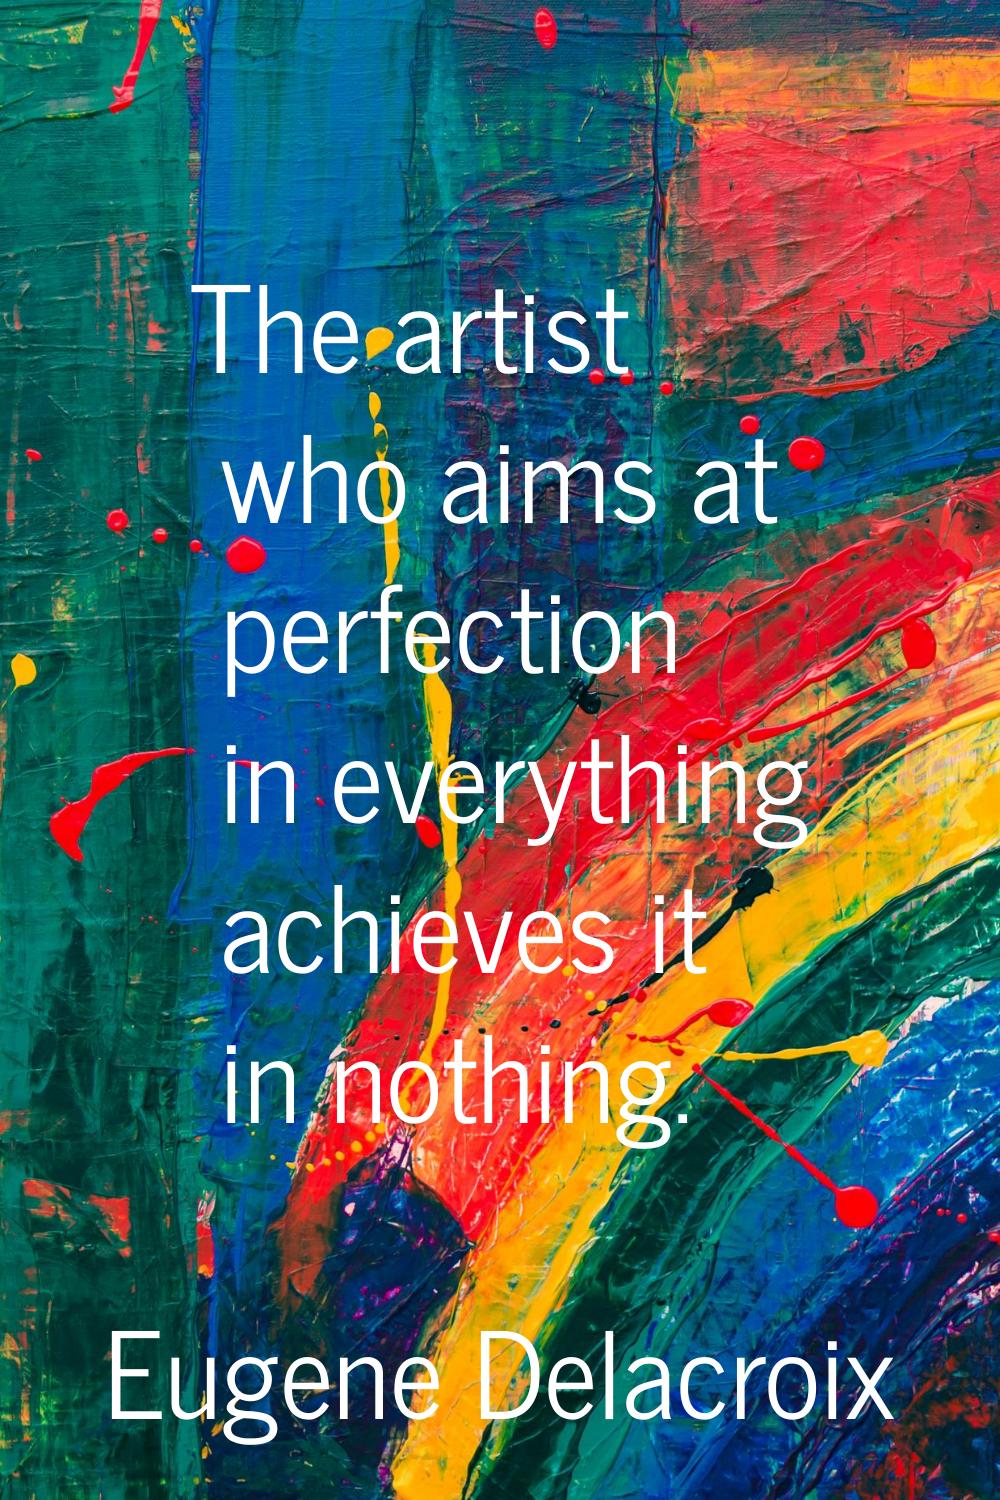 The artist who aims at perfection in everything achieves it in nothing.